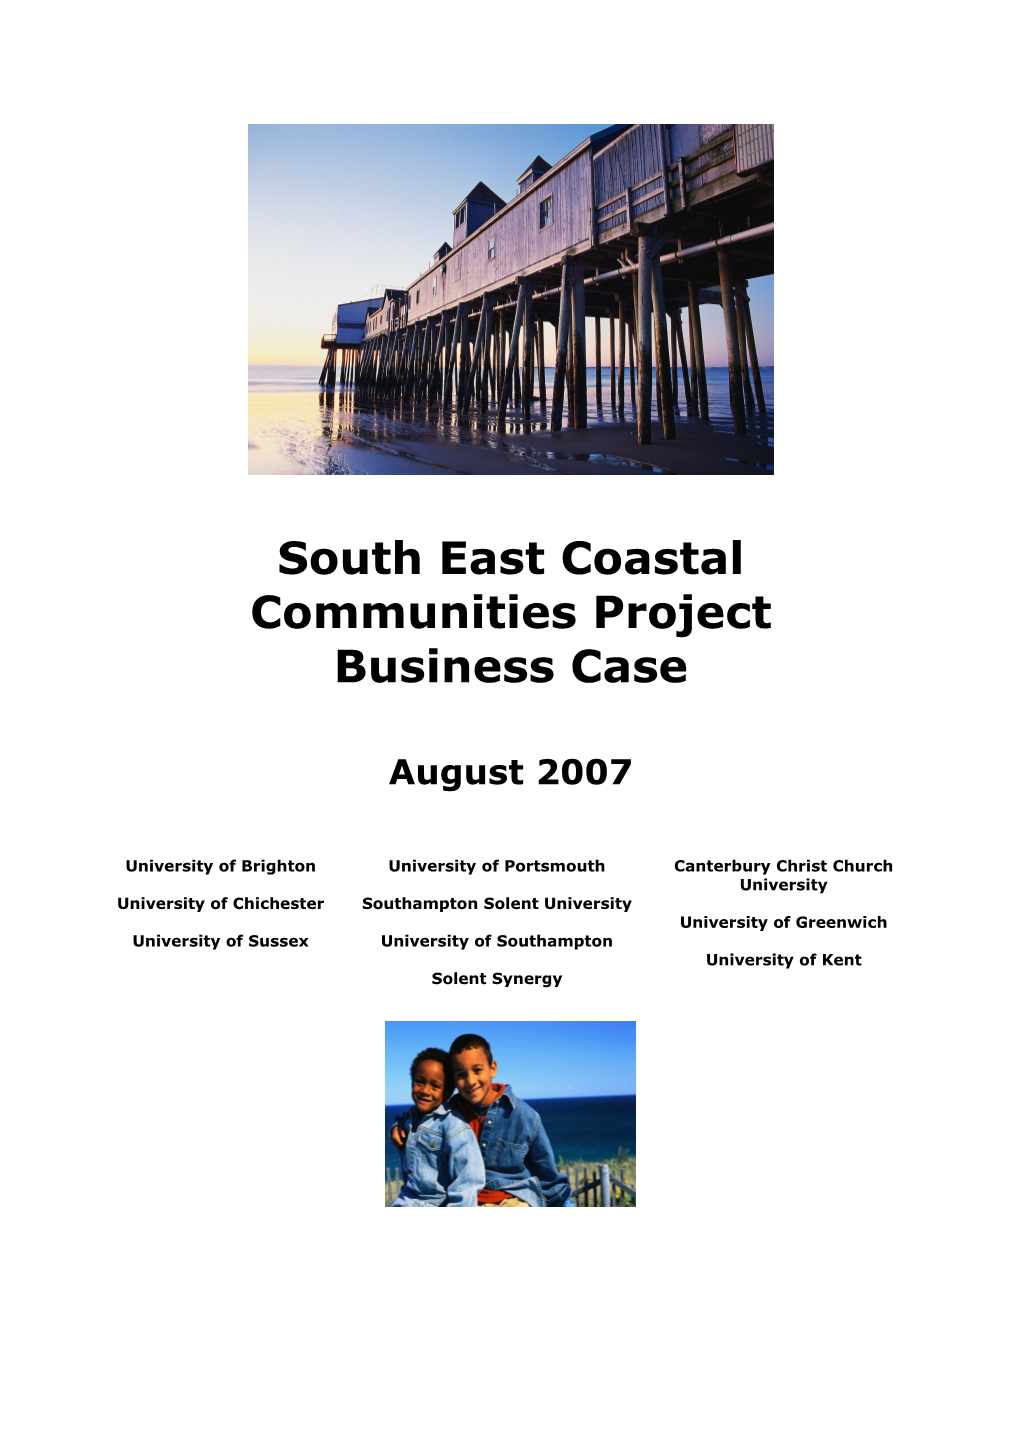 South East Coastal Communities Project